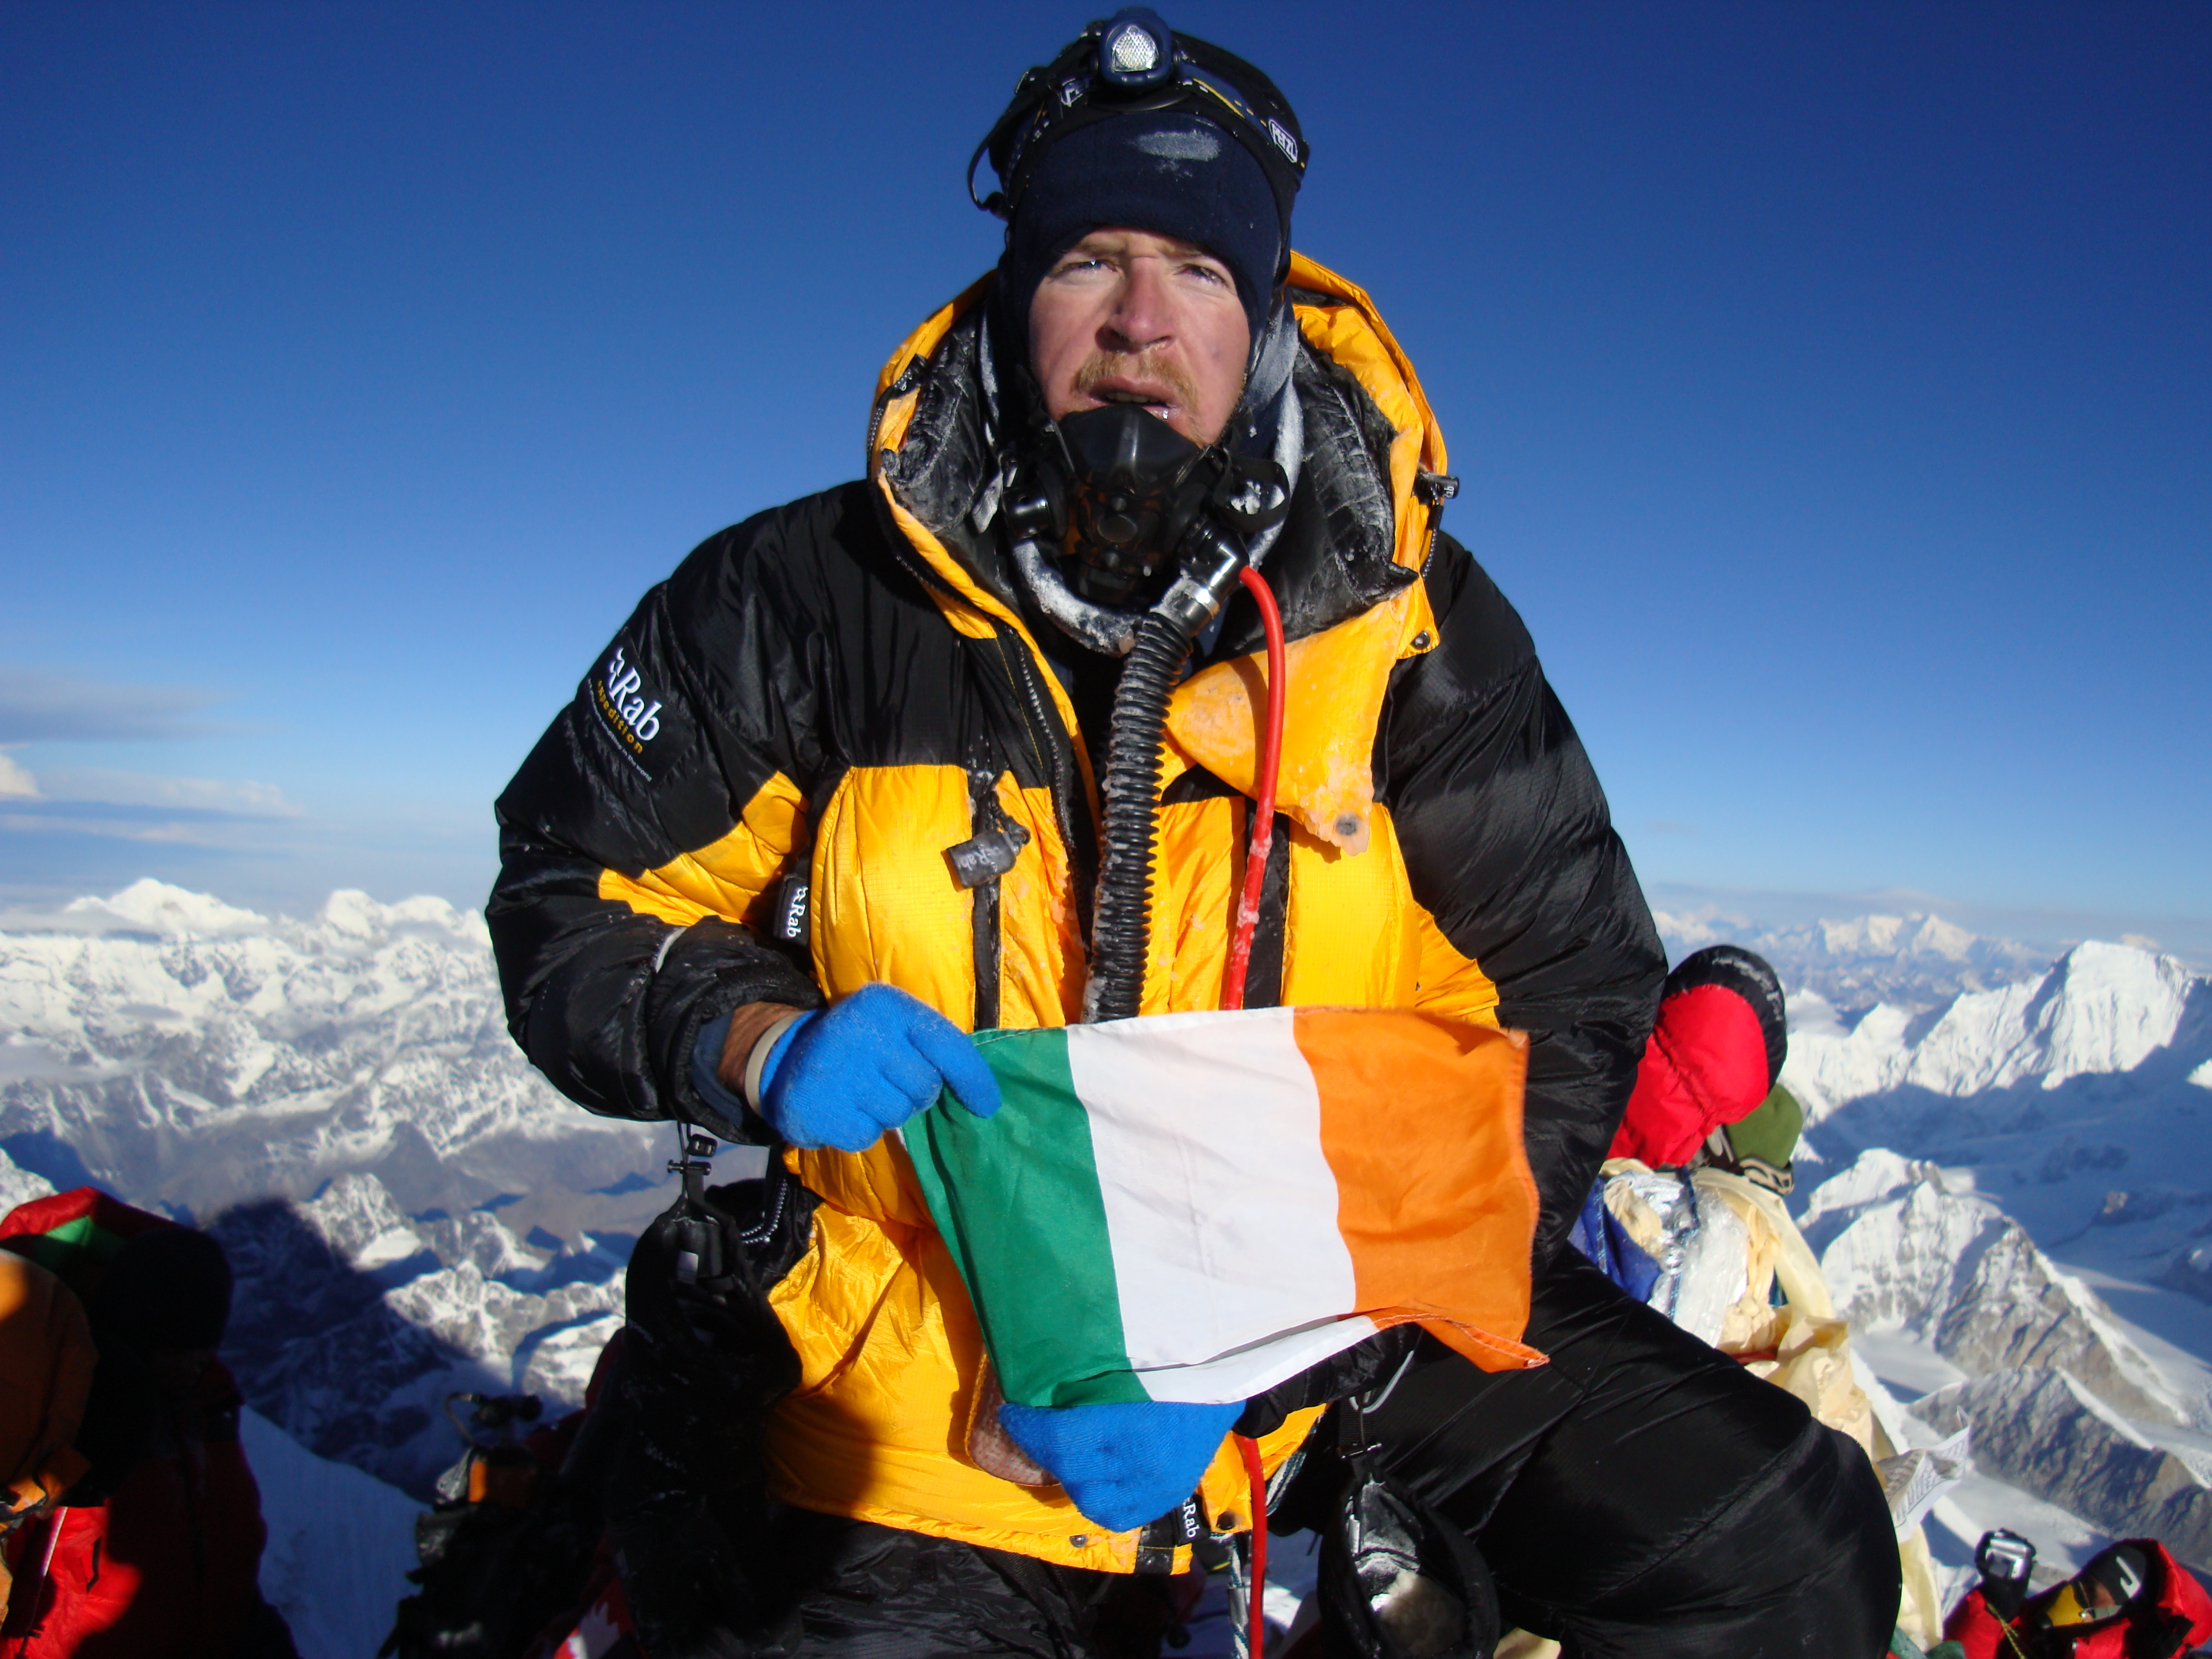 The summit of Everest